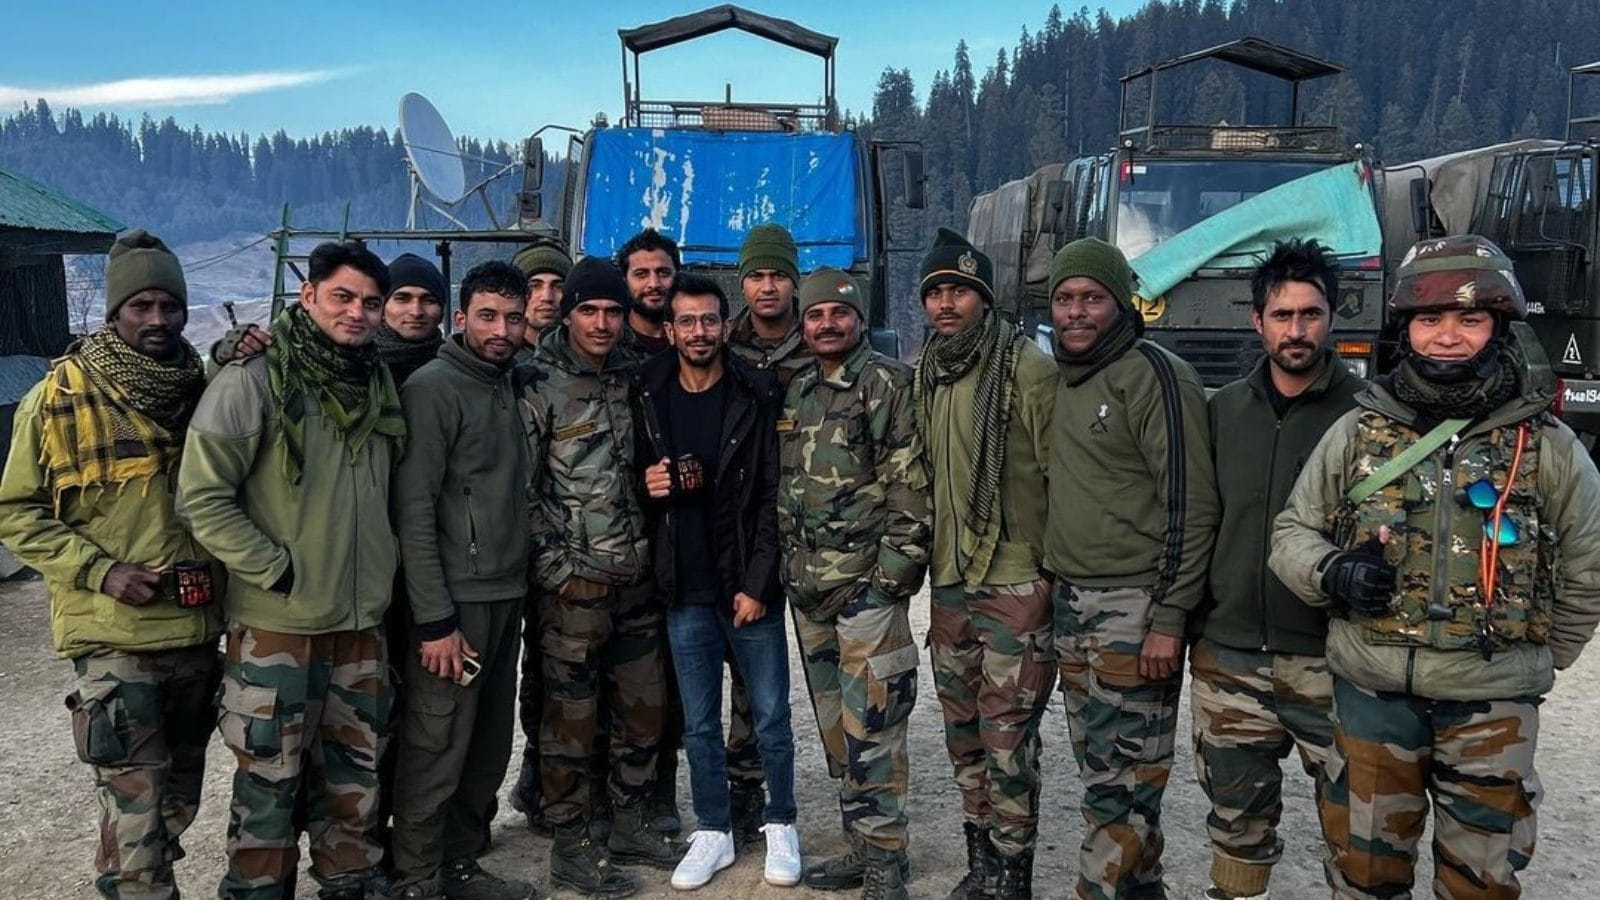 ‘No Spider-Man No Superman’: Yuzvendra Chahal Shares Picture With ‘Real Heroes’